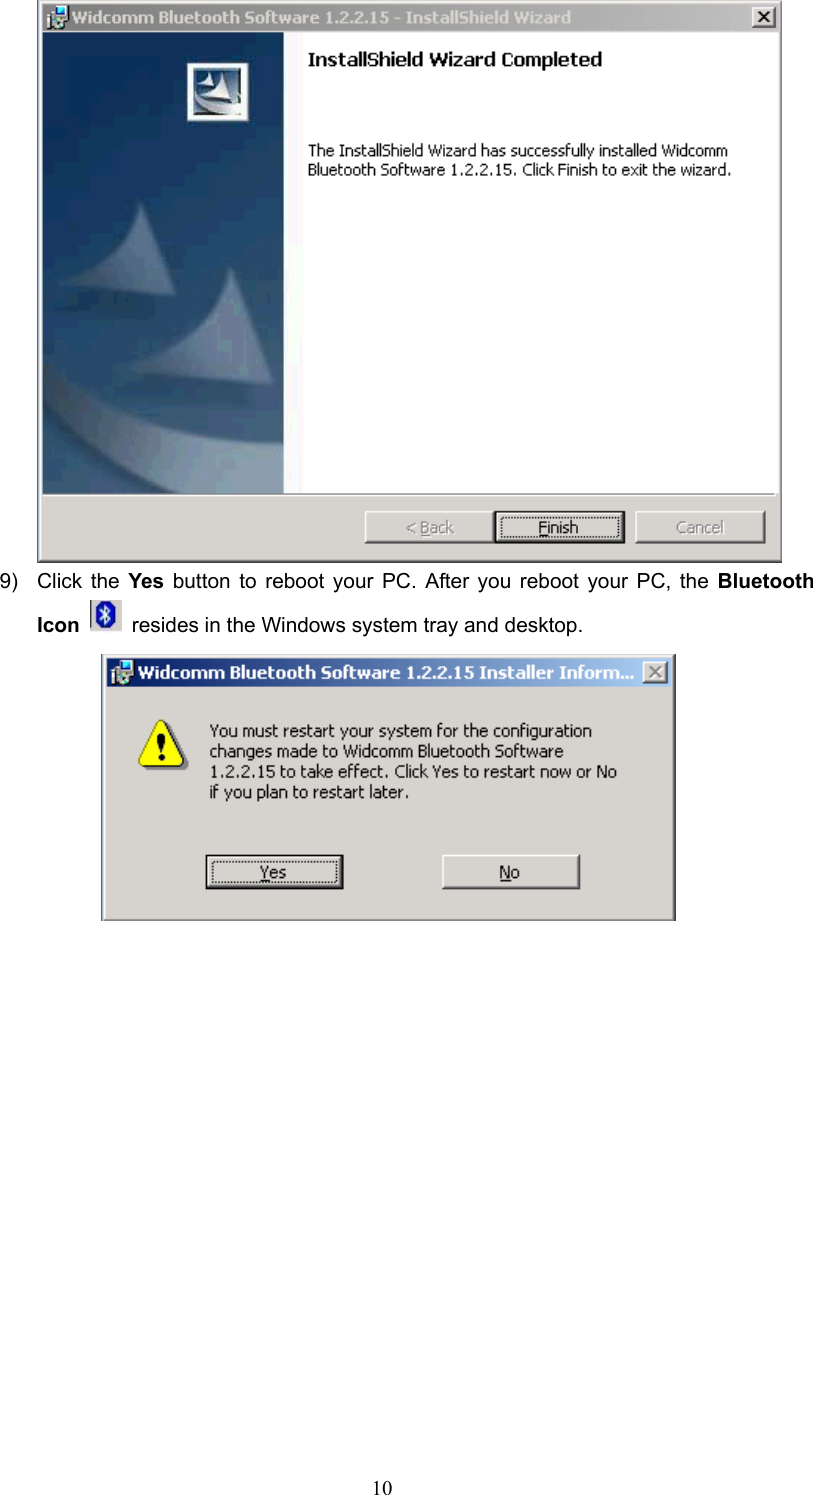  10  9) Click the Yes button to reboot your PC. After you reboot your PC, the Bluetooth Icon   resides in the Windows system tray and desktop.    